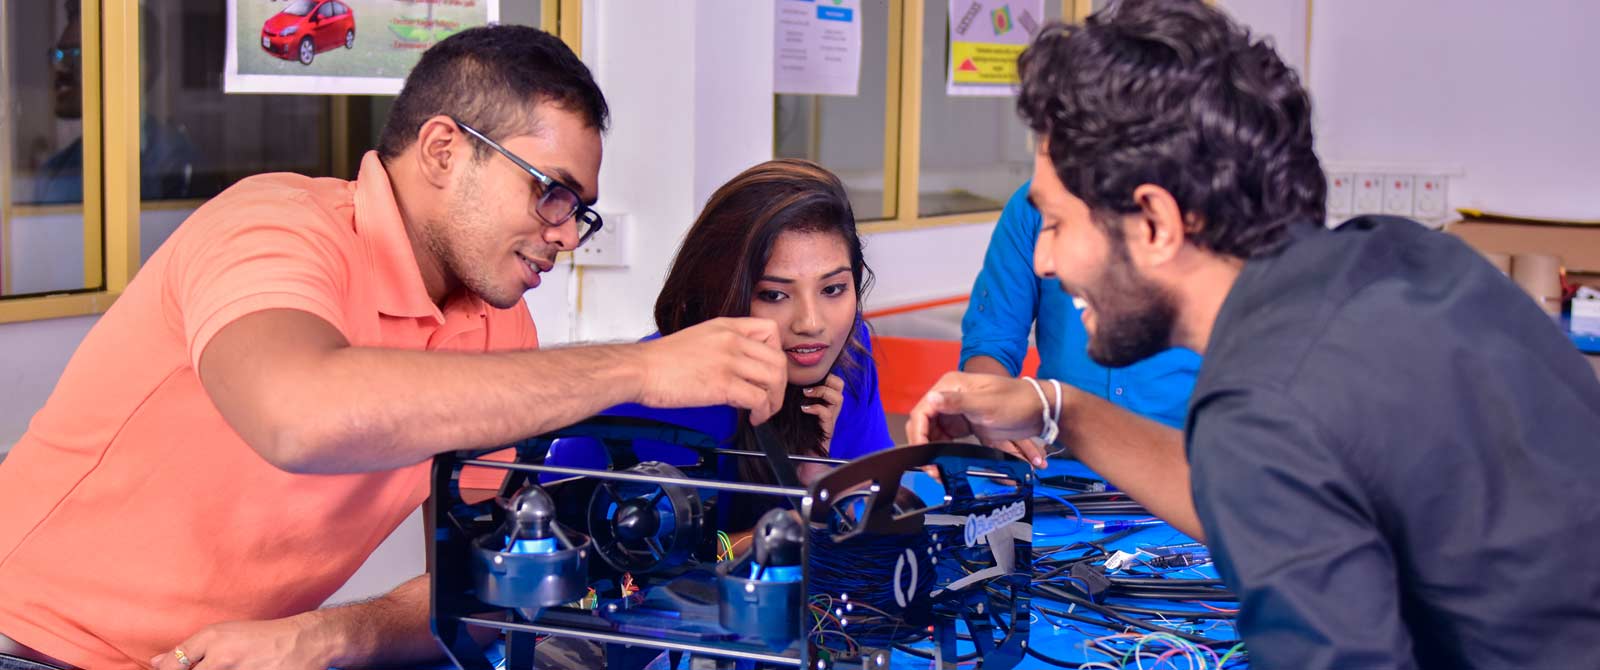 engineering and technology courses